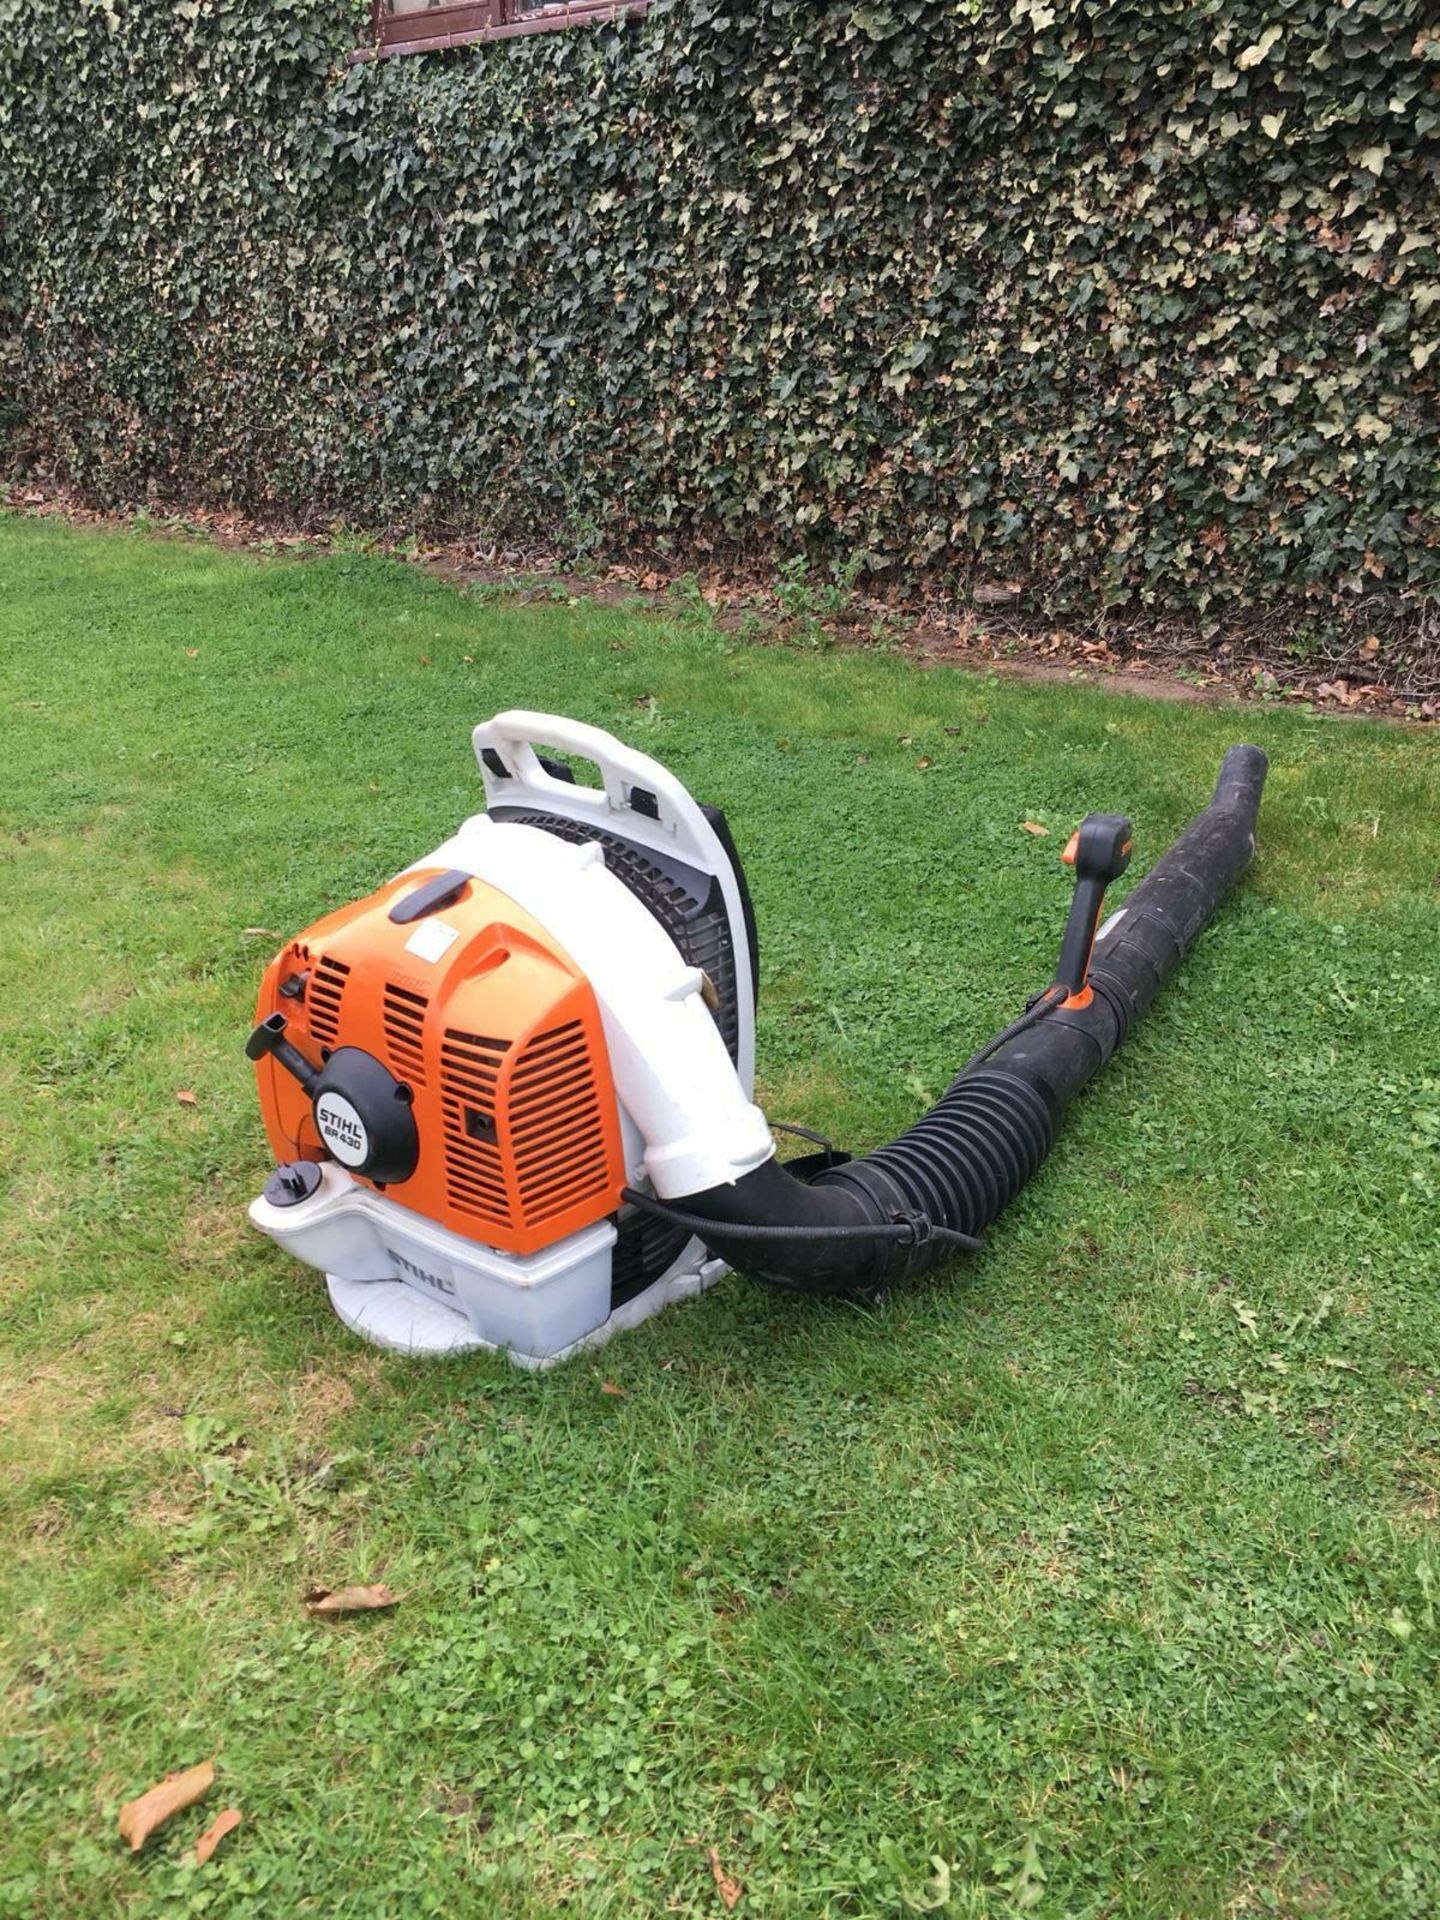 STIHL BACK PACK LEAF BLOWER, MODEL: BR430, MANUFACTURED 06/2016, EXCELLENT WORKING CONDITION - Image 3 of 5